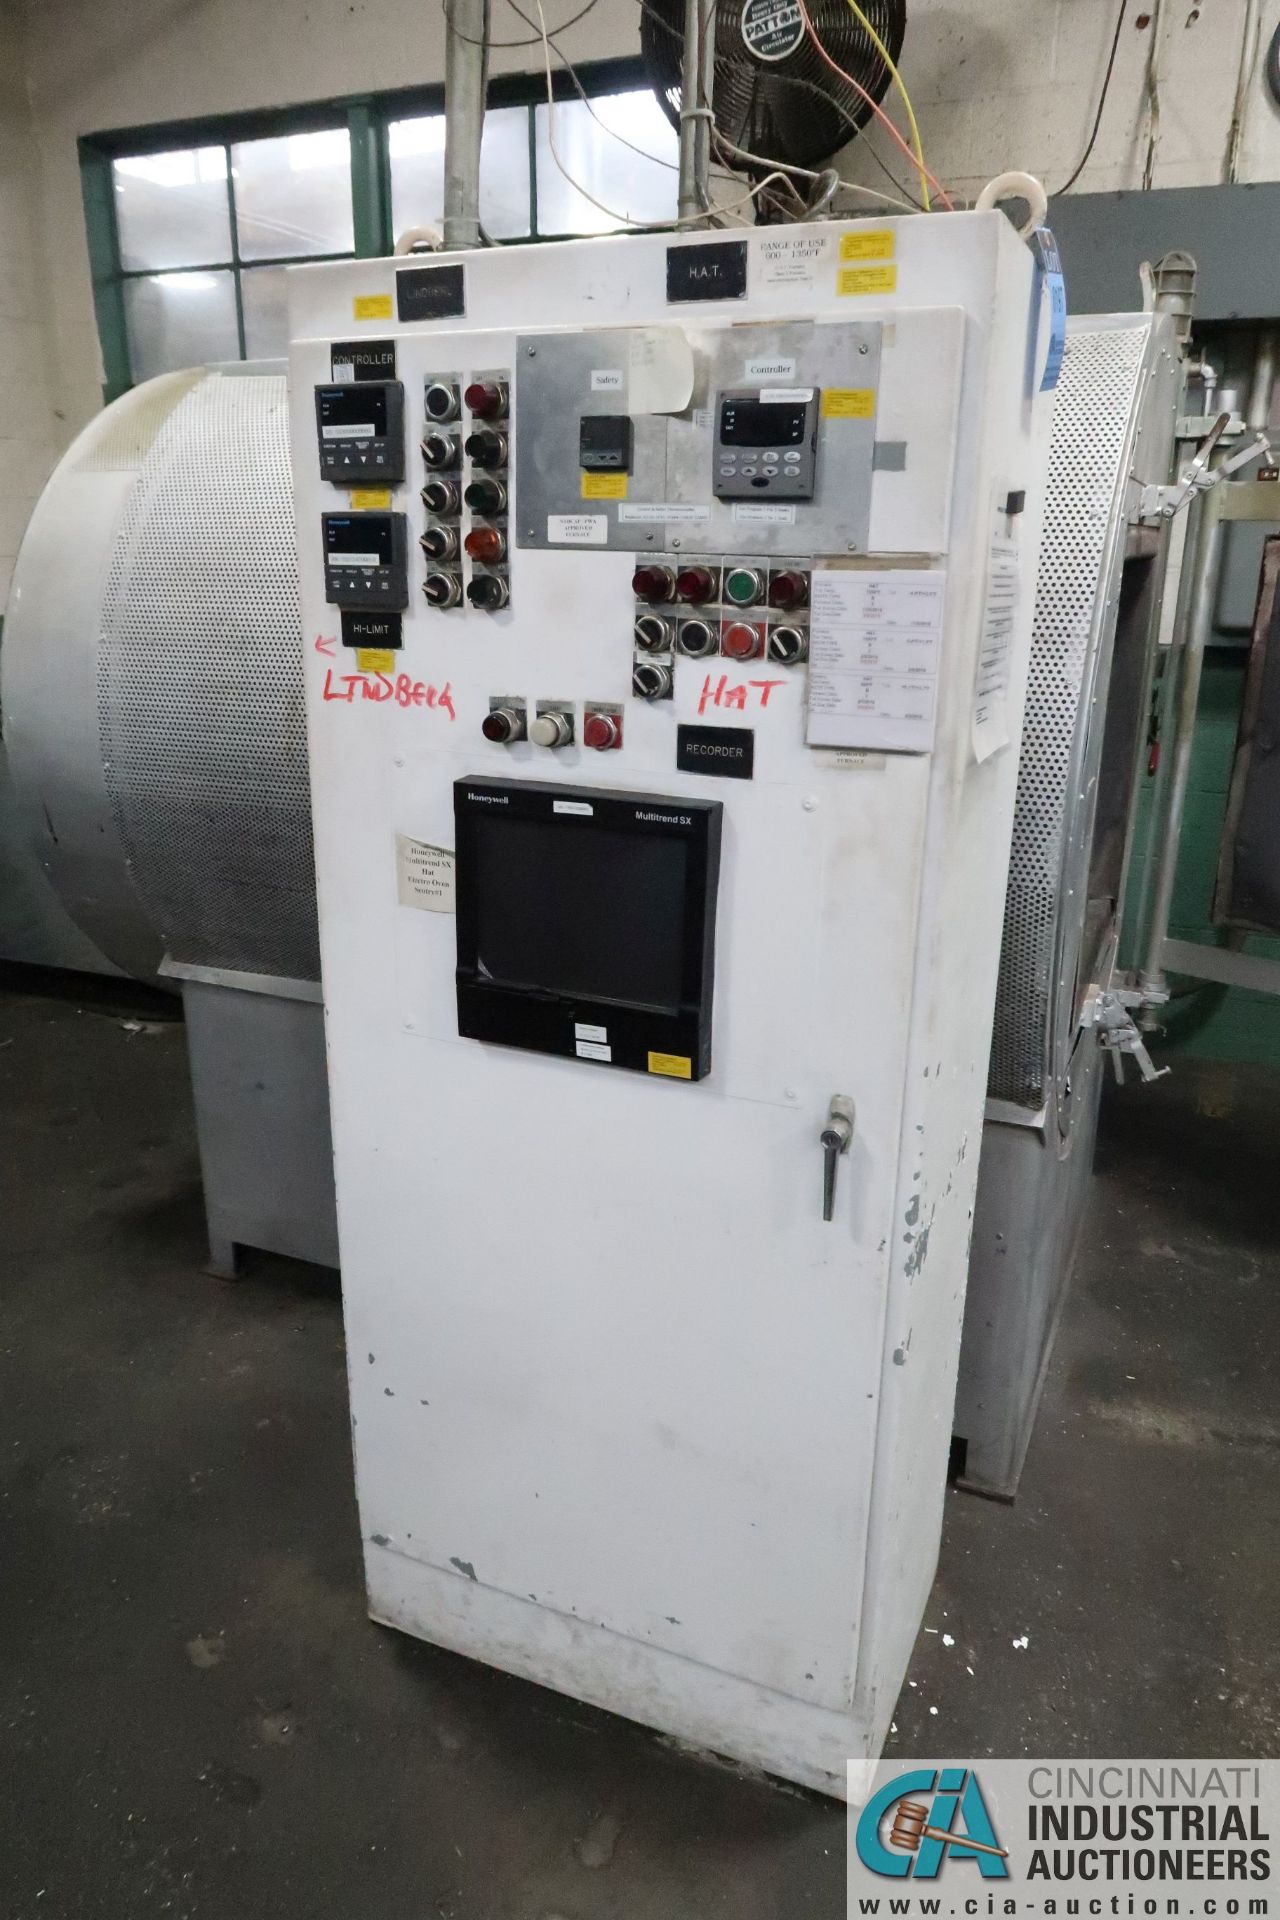 HONEYWELL CONTROL CABINET - Loading fee due the “ERRA” Pedowitz Machinery Movers $50.00